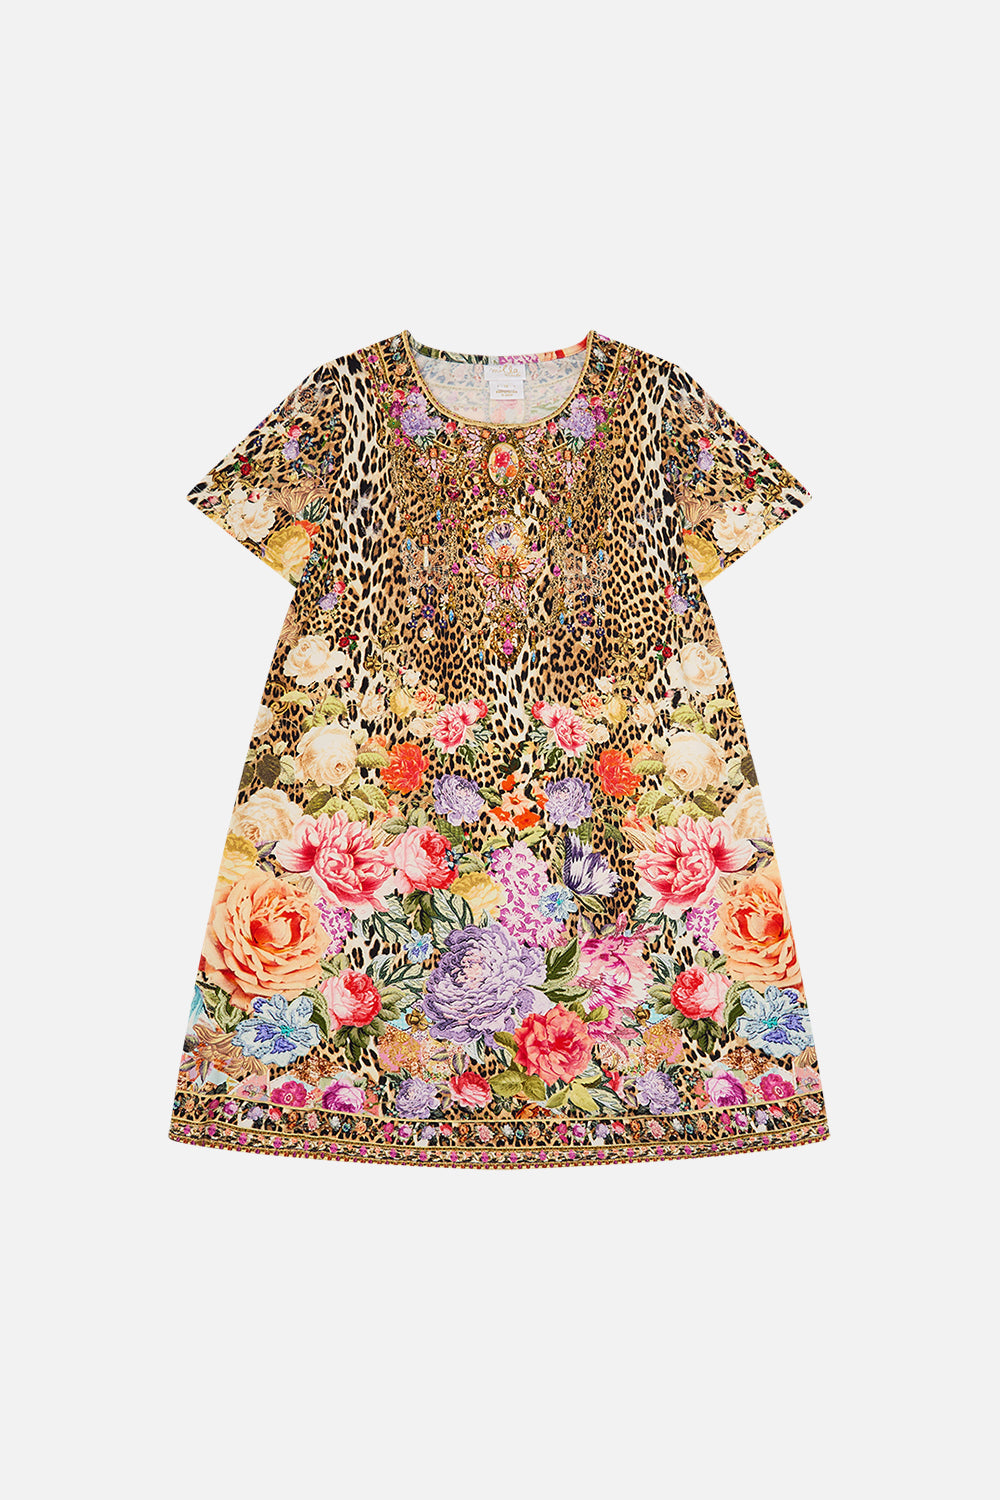 Milla by CAMILLA floral t-shirt dress with flare hem (12-14) in Heirloom Anthem